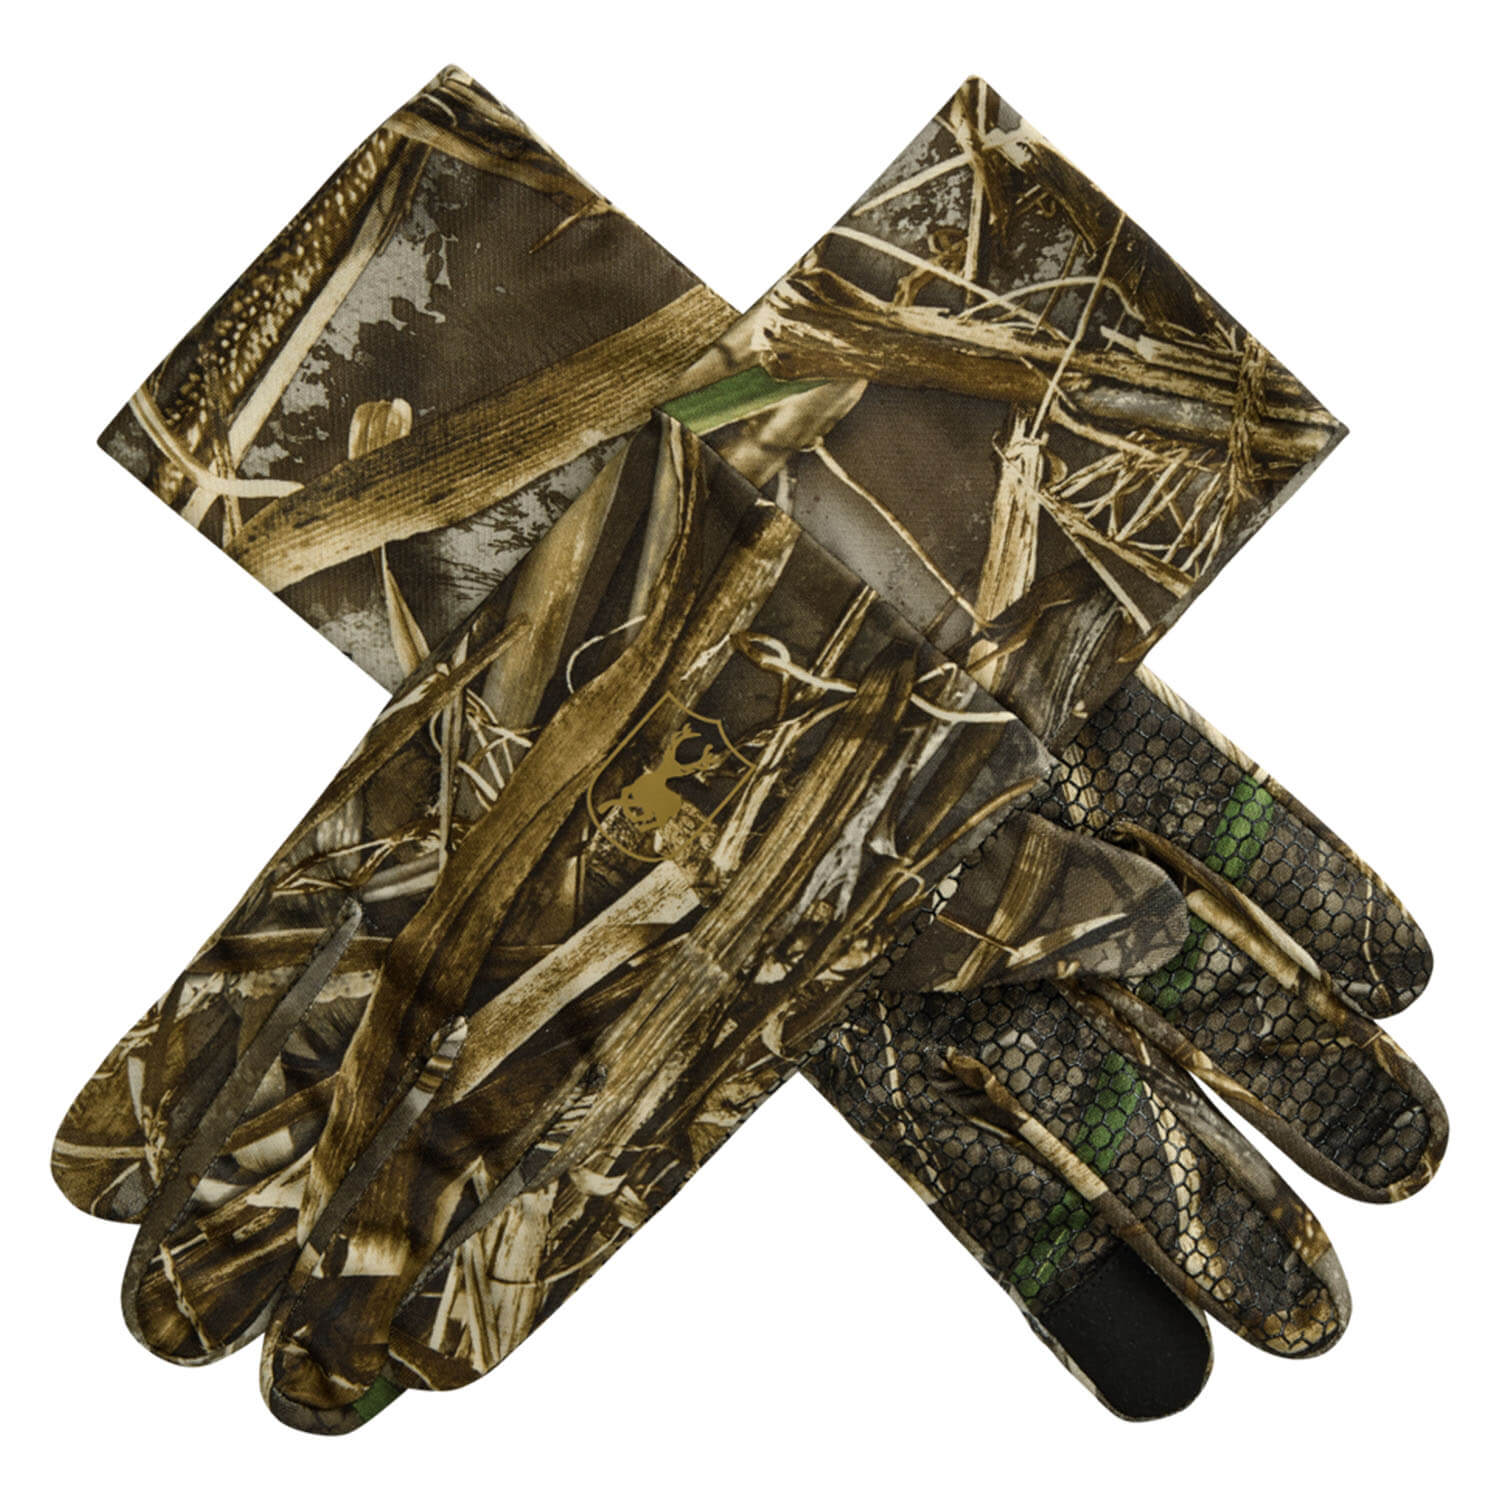 Deerhunter Gloves with silicone grip (Realtree MAX-7) - Camouflage Gloves